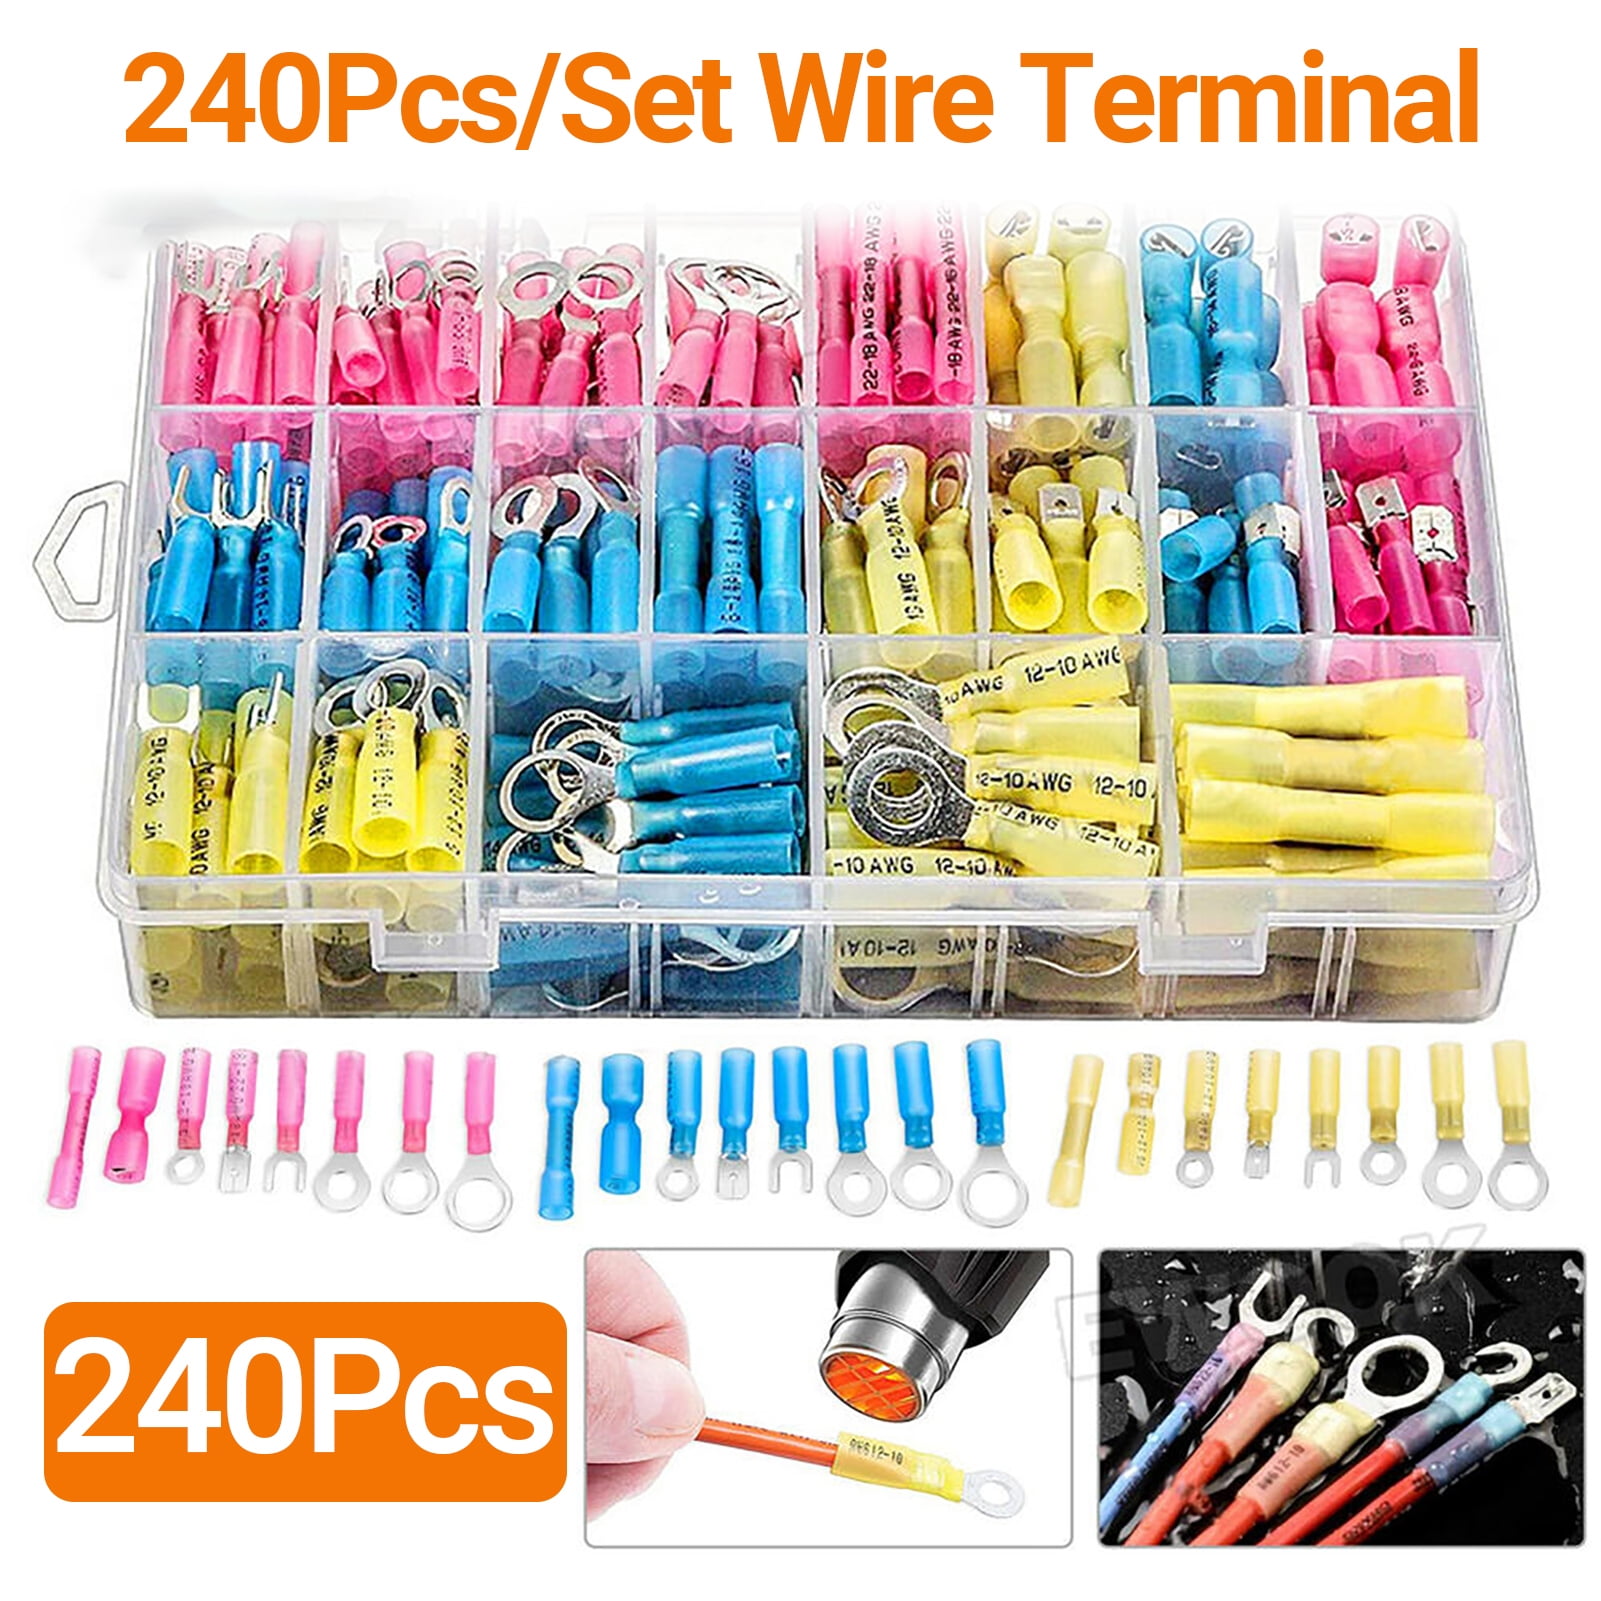 200pcs 22-10 AWG set Wire Spade Fork Insulated Connector Terminal Power Ground 